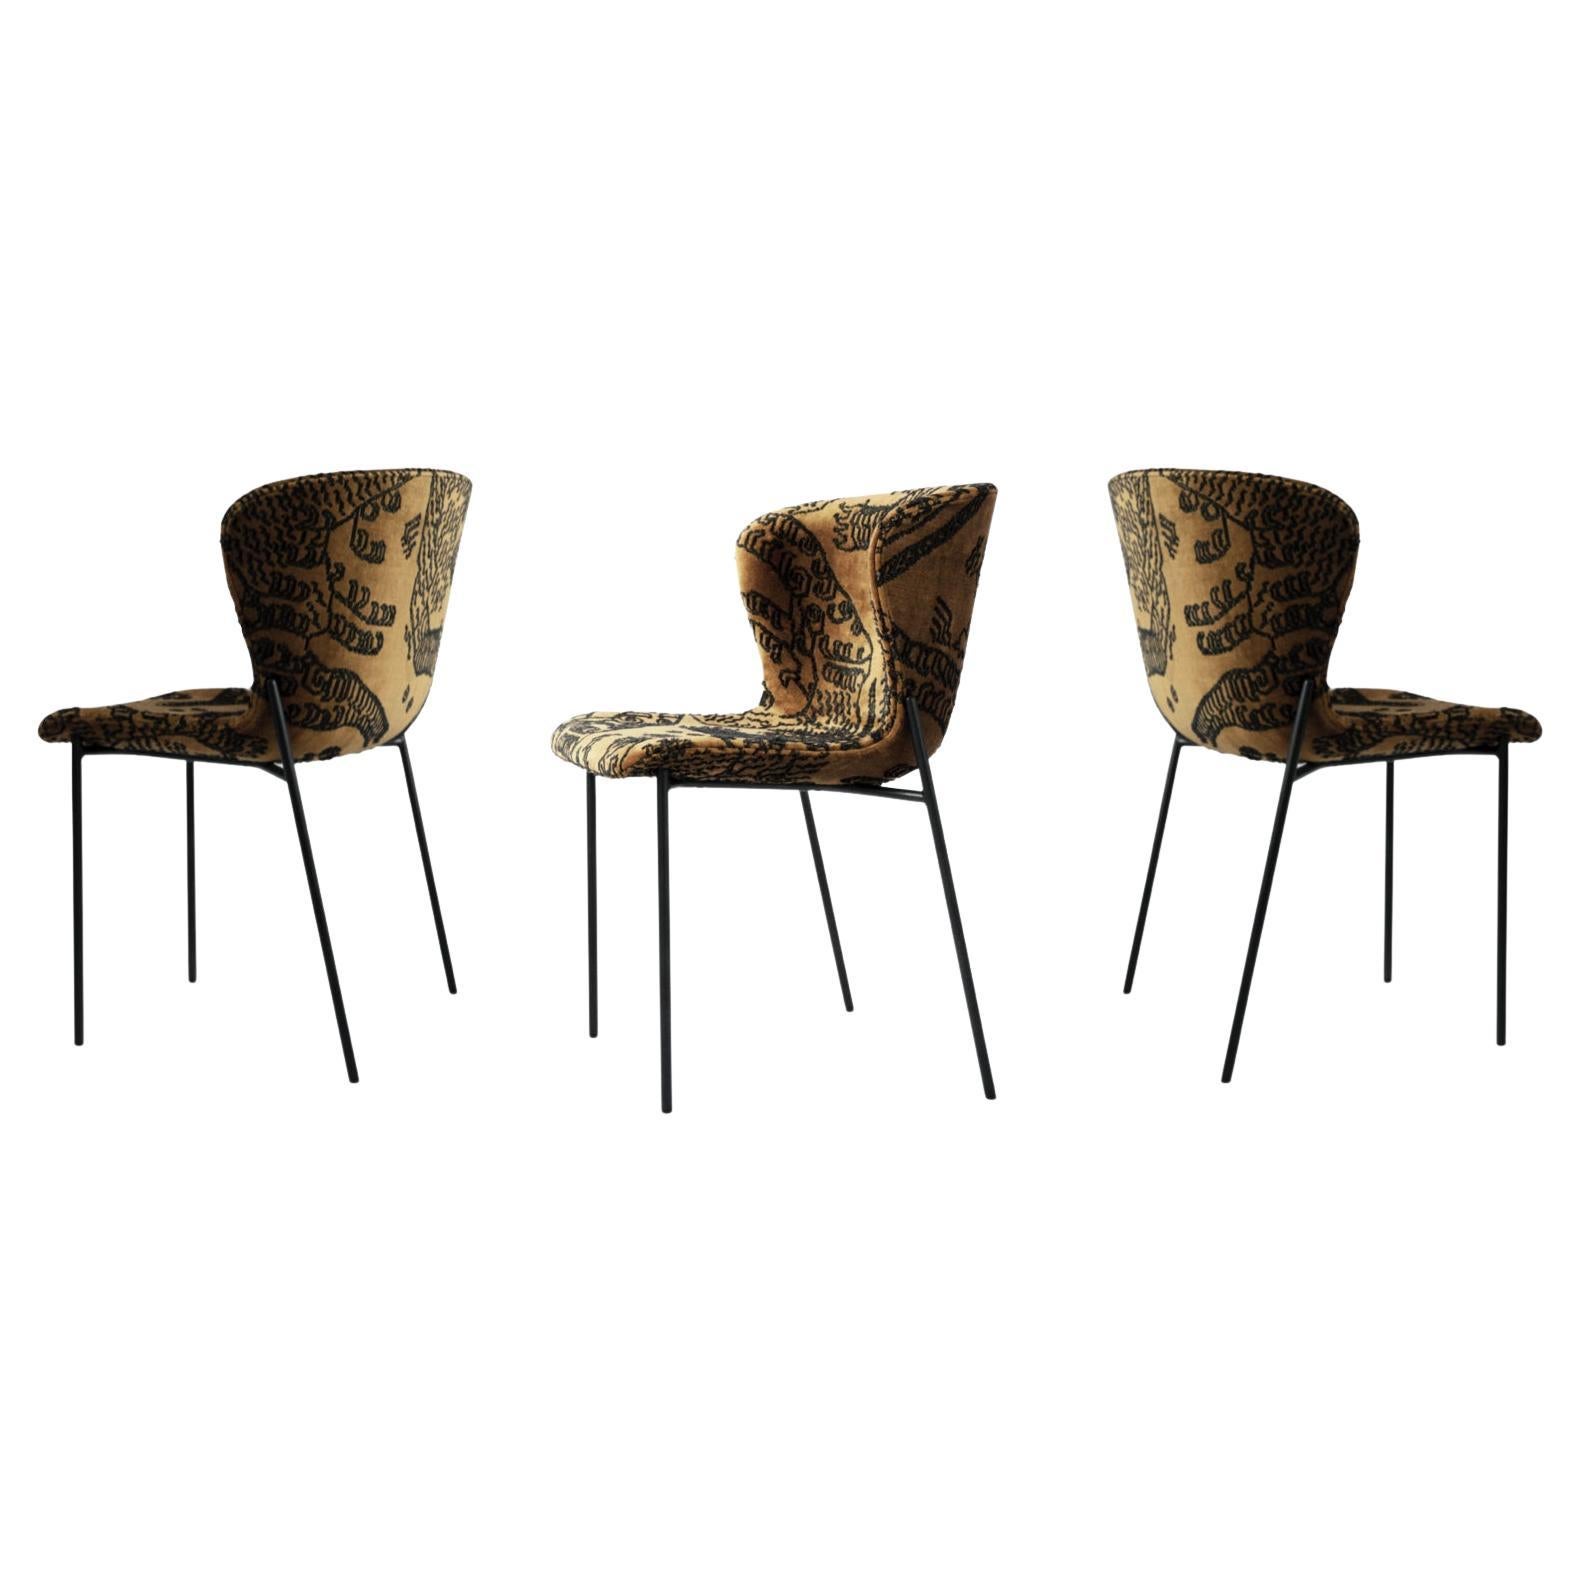 Contemporary Set of 3 Chairs 'Pipe', Tiger Mountain Fauve 02, Black Frame For Sale